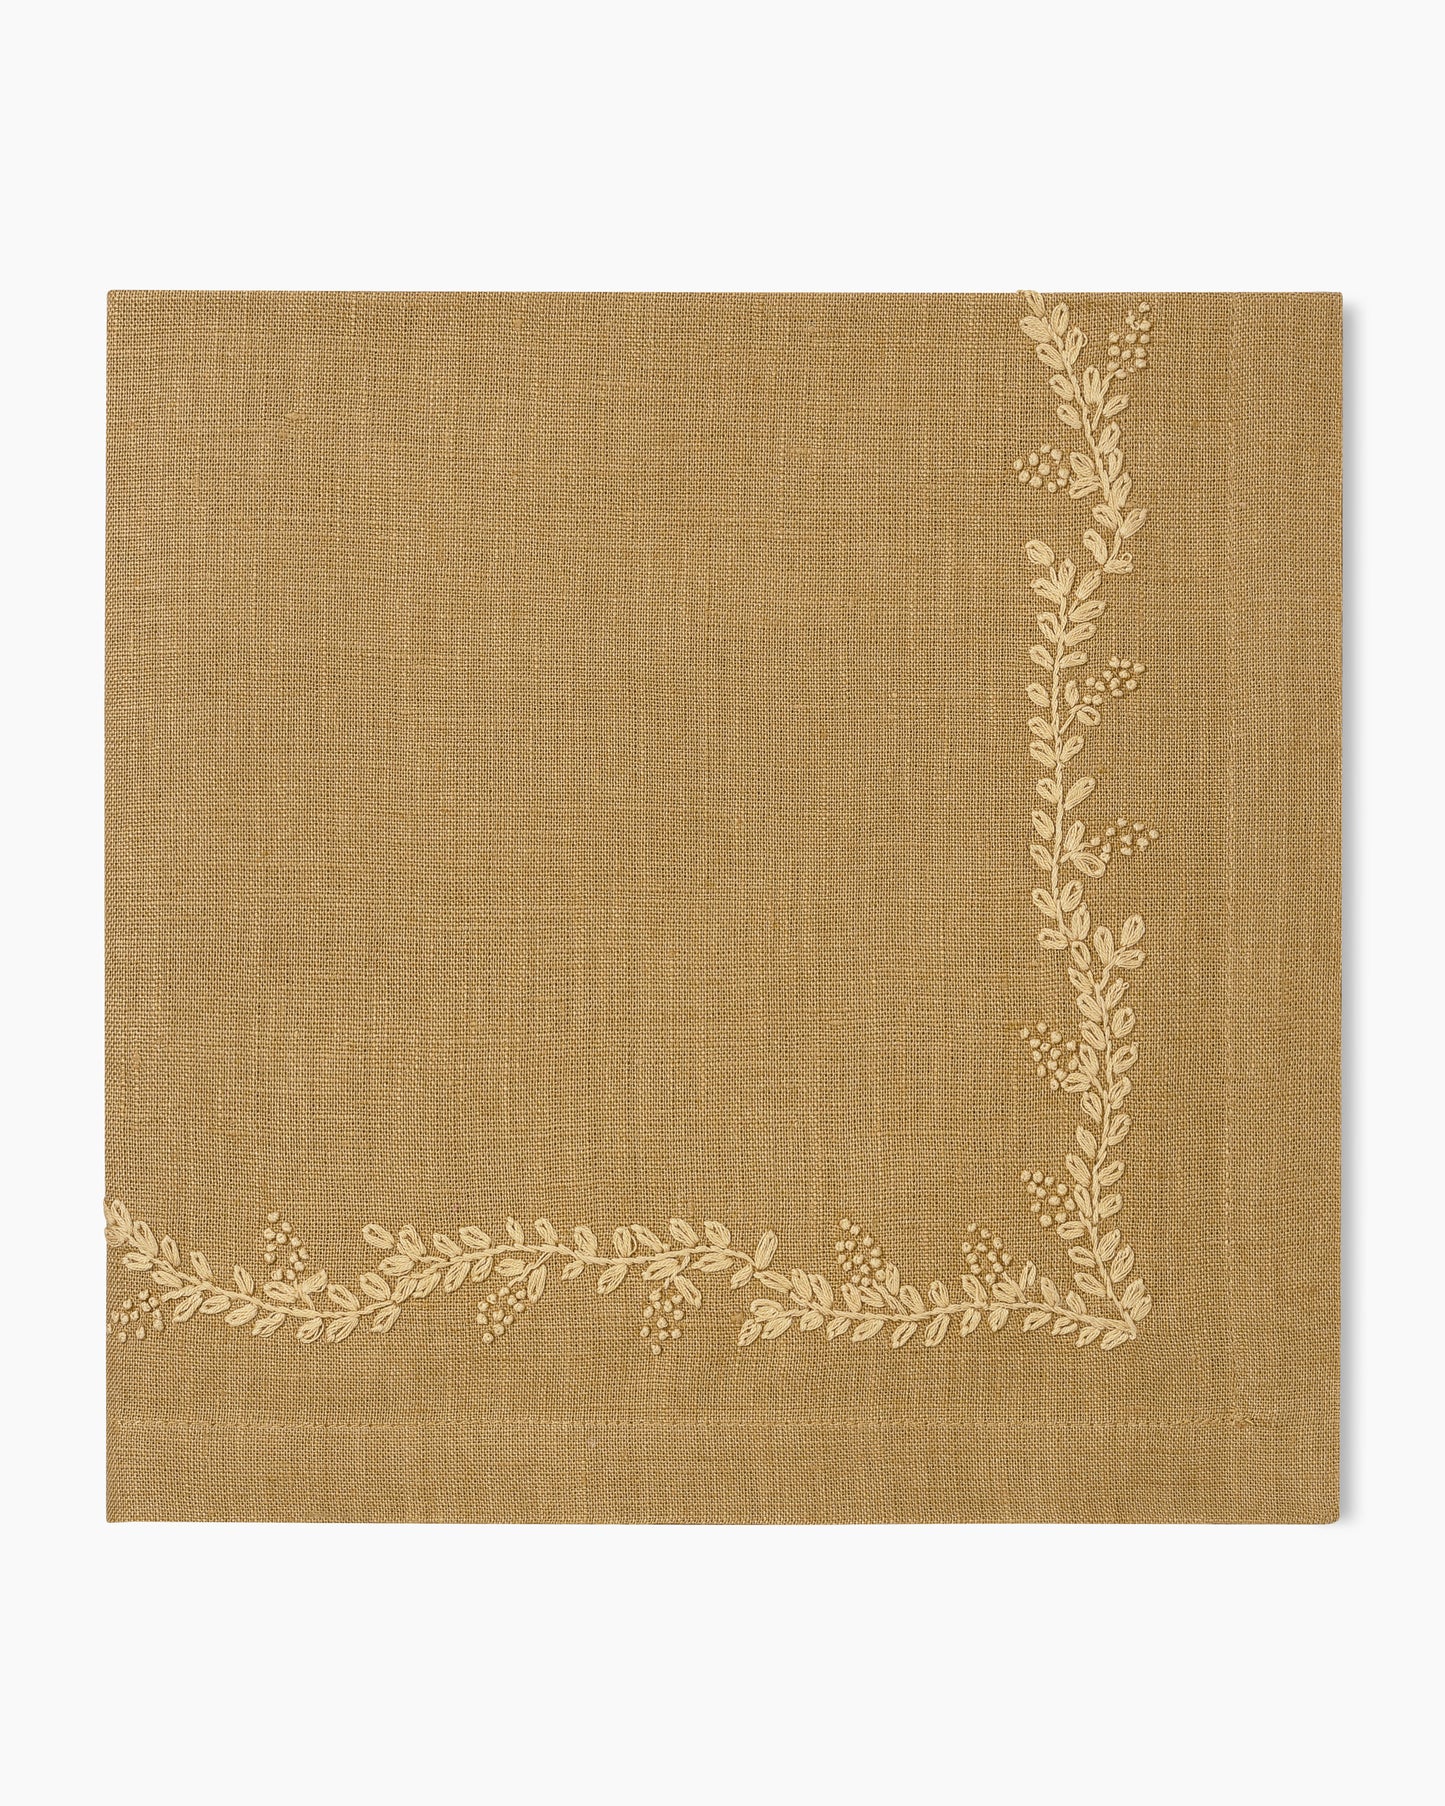 A Prism Vine Linen Dinner Napkin available in 13 Colors with a gold leaf design, perfect for your table linens.